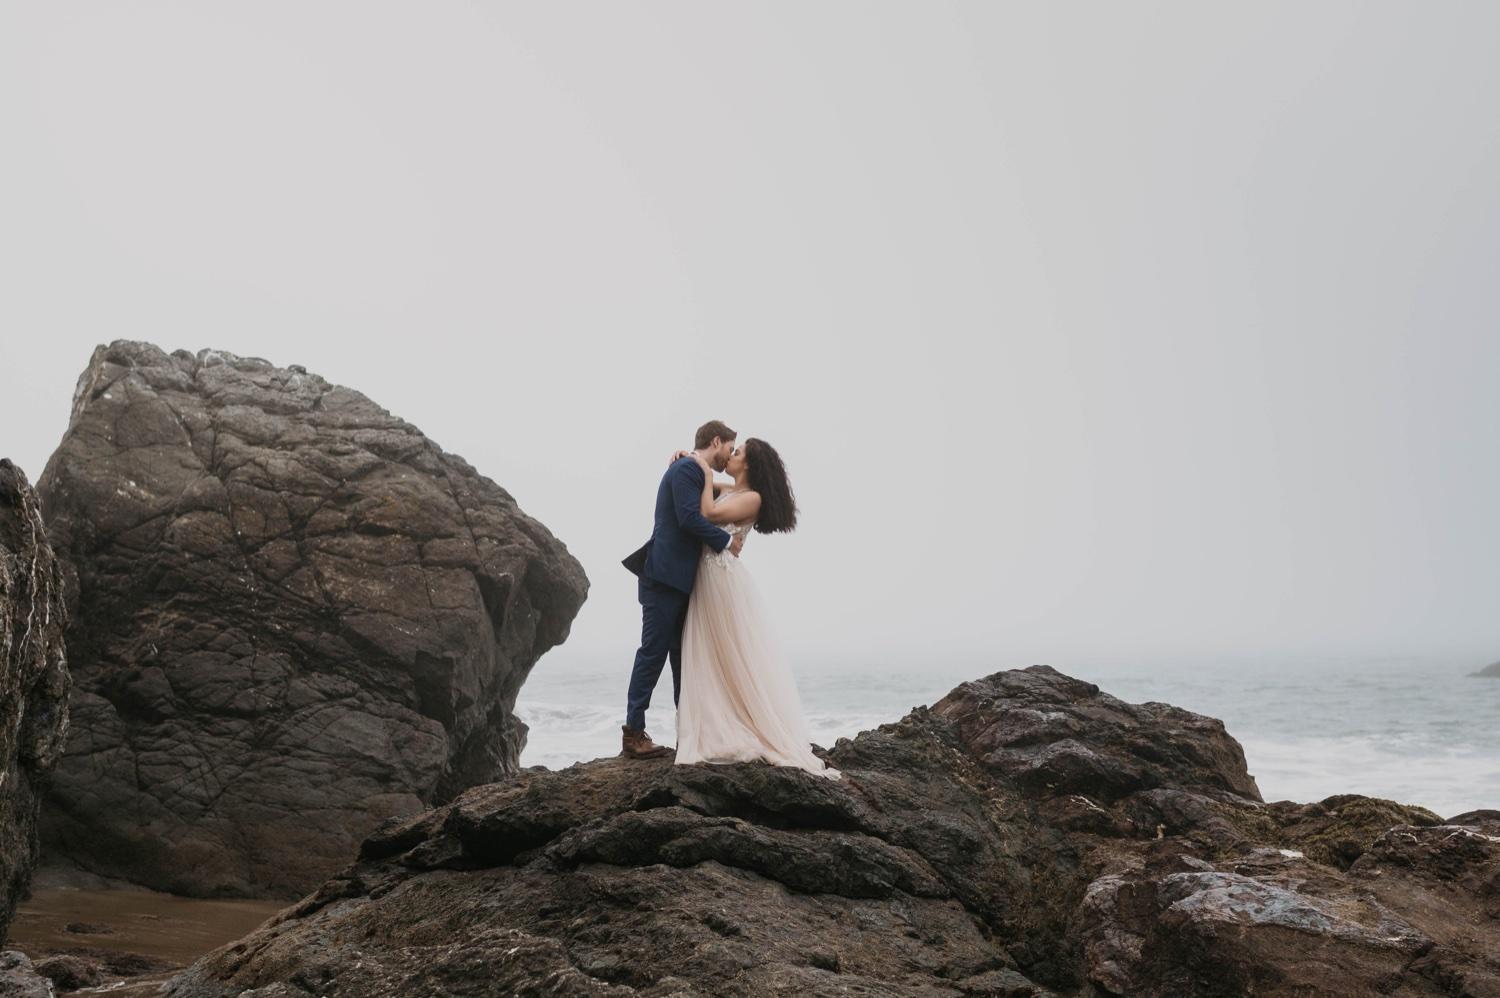 Intimate Weddings vs. Elopements: What's the difference? — Will Khoury  Photography